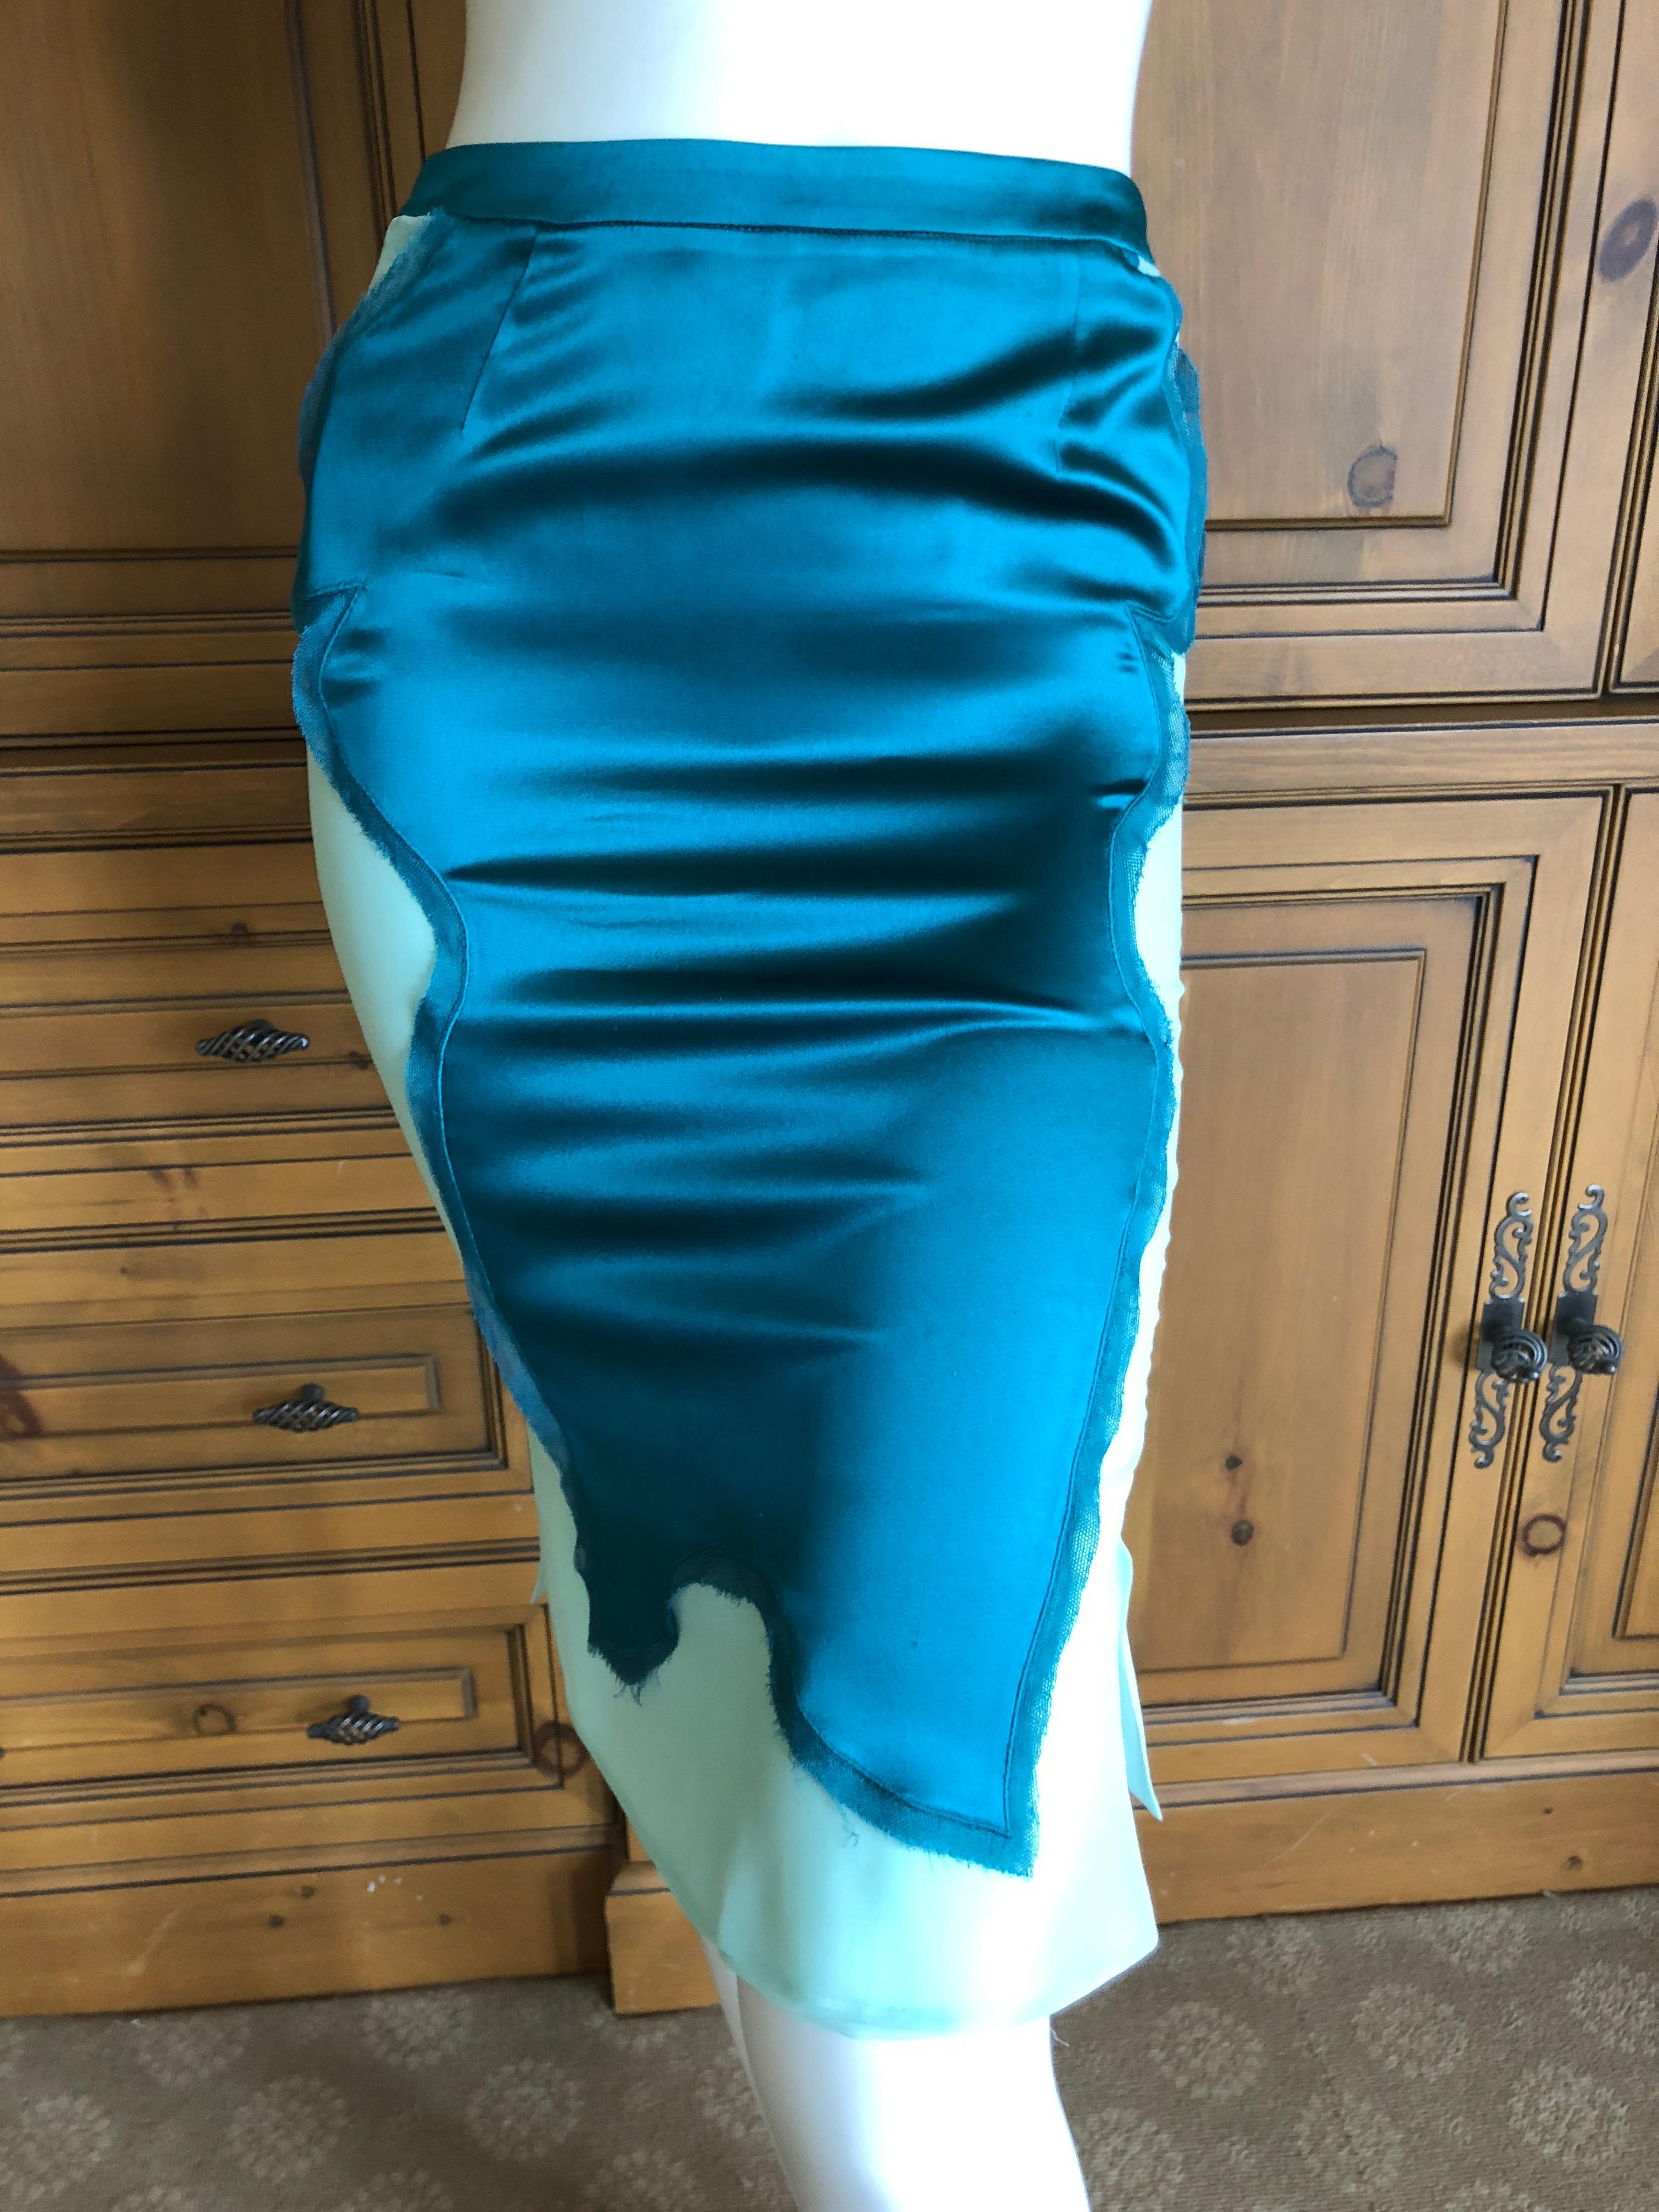 Yves Saint Laurent by Tom Ford 2004 Teal and Turquoise Silk Skirt For Sale 1